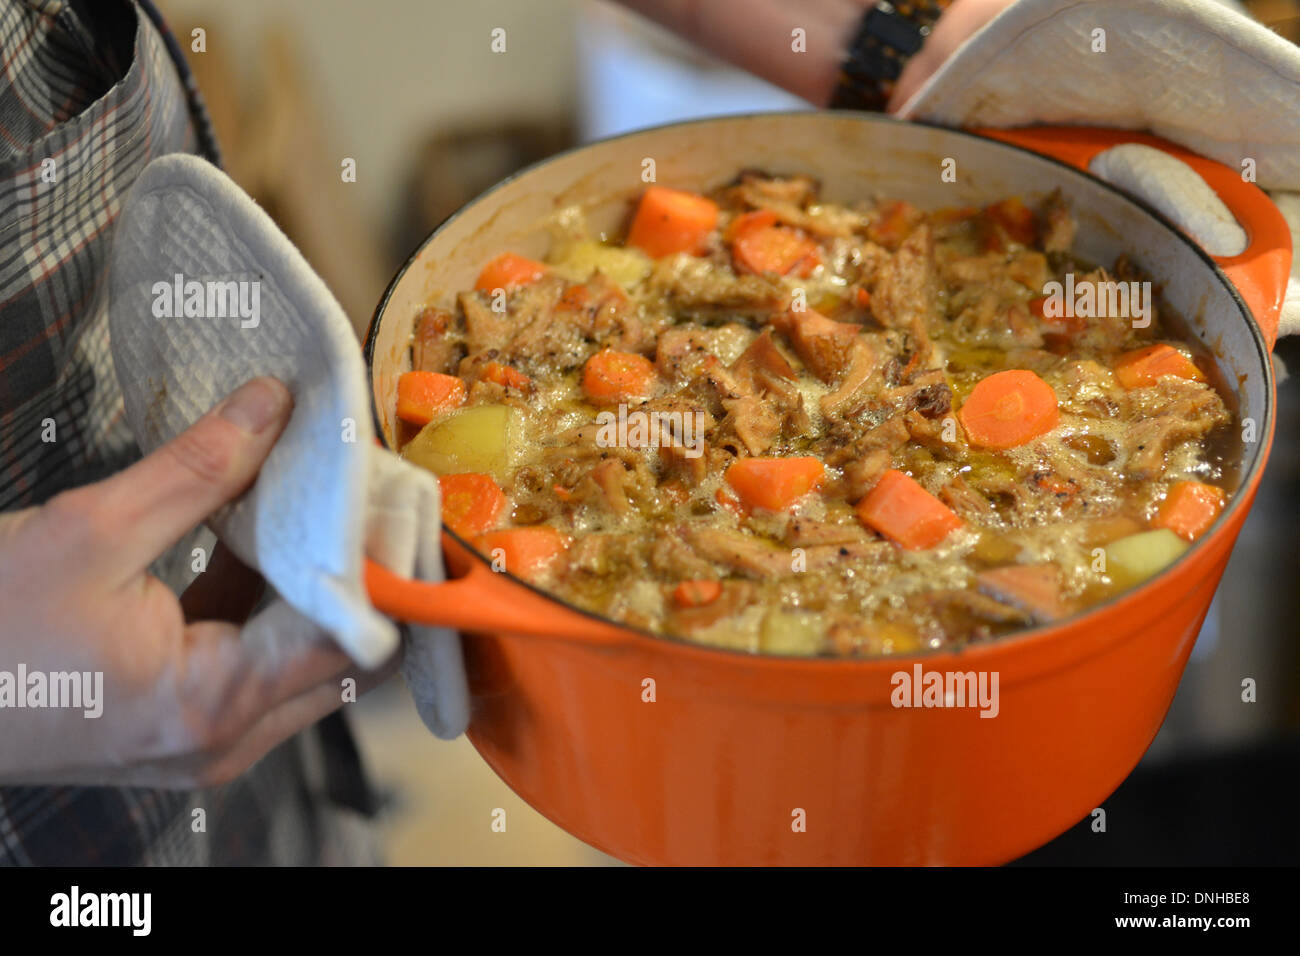 COOKING TRIPE IN THE MANNER TRADITIONAL IN CAEN, FRANCE Stock Photo